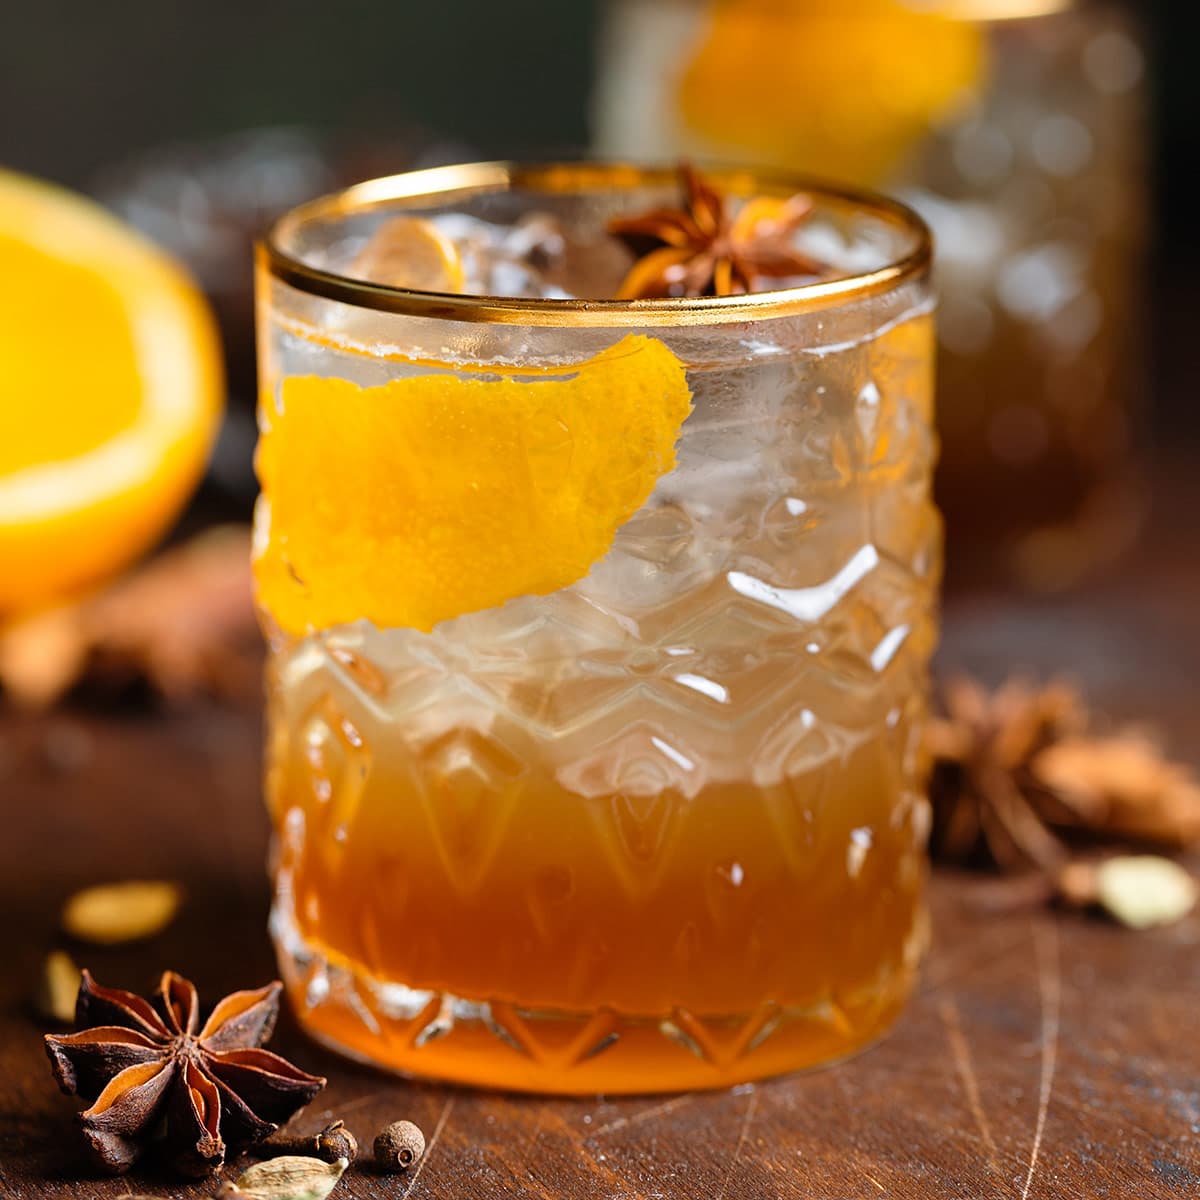 Old fashioned cocktail in a gold-rimmed glass with ice, orange zest, and star anise.